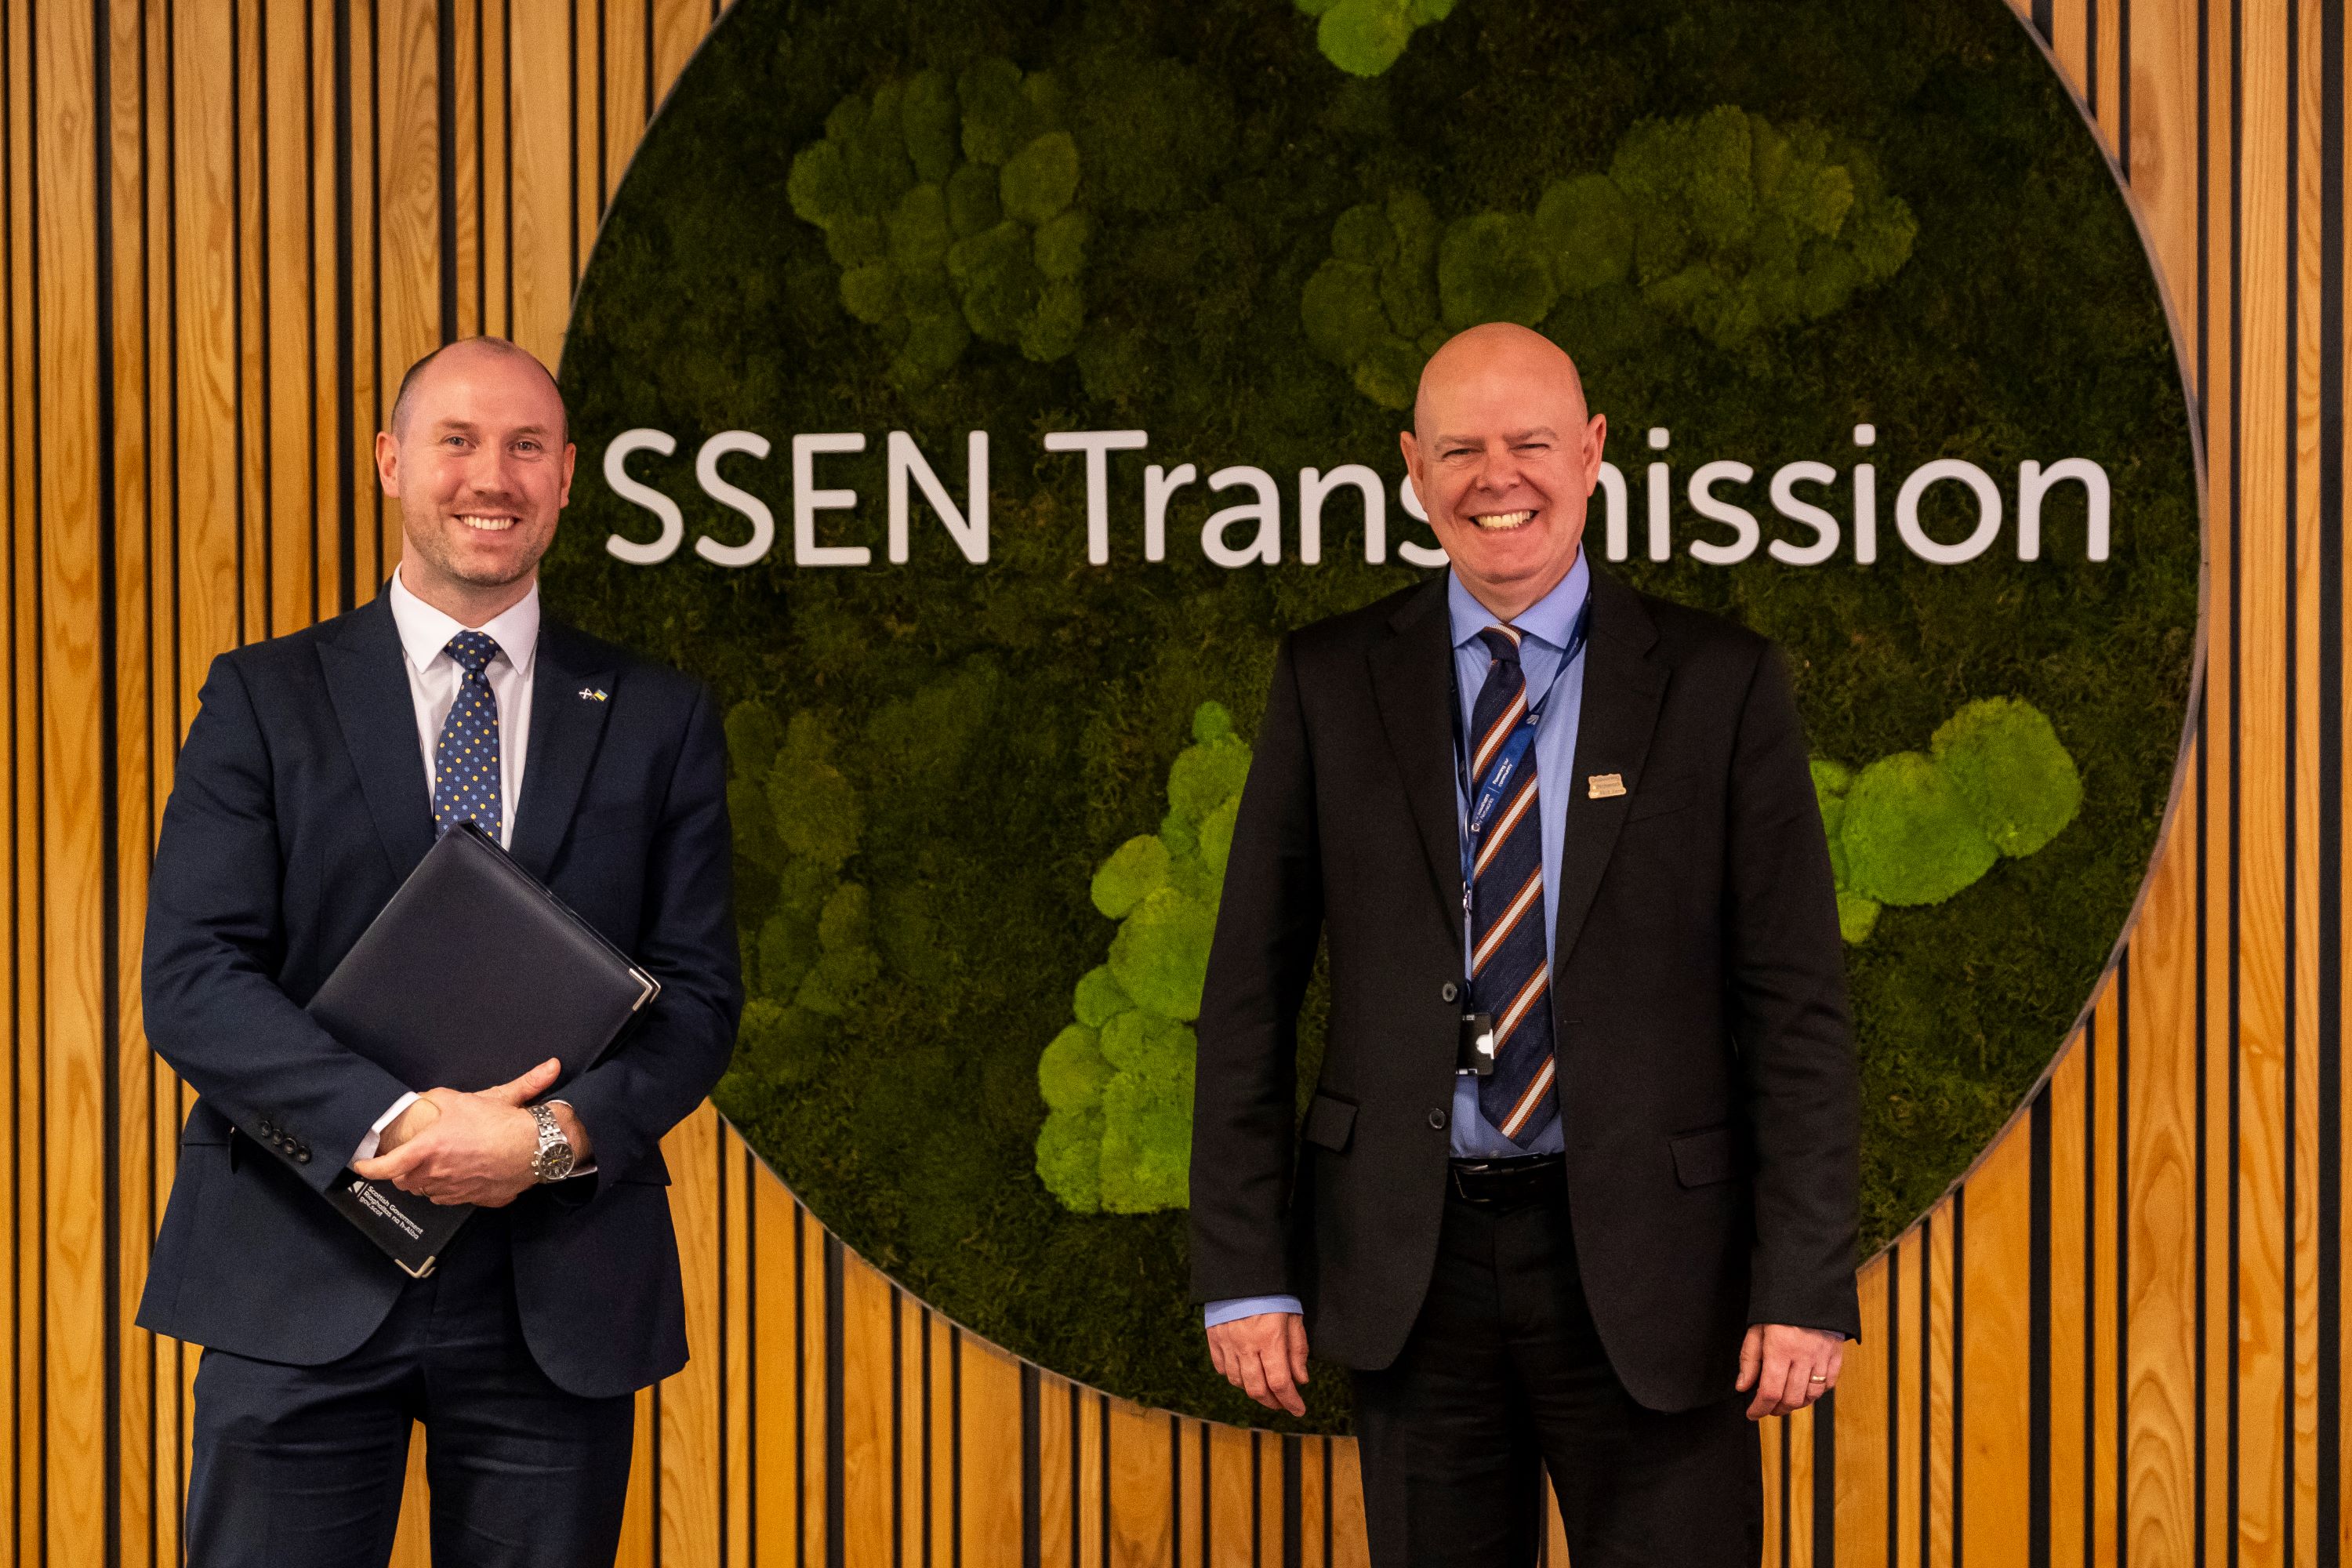 SSEN Transmission_Neil Gray MSP (left) and Rob McDonald, Managing Director for SSEN Transmission, at the new office opening .JPG